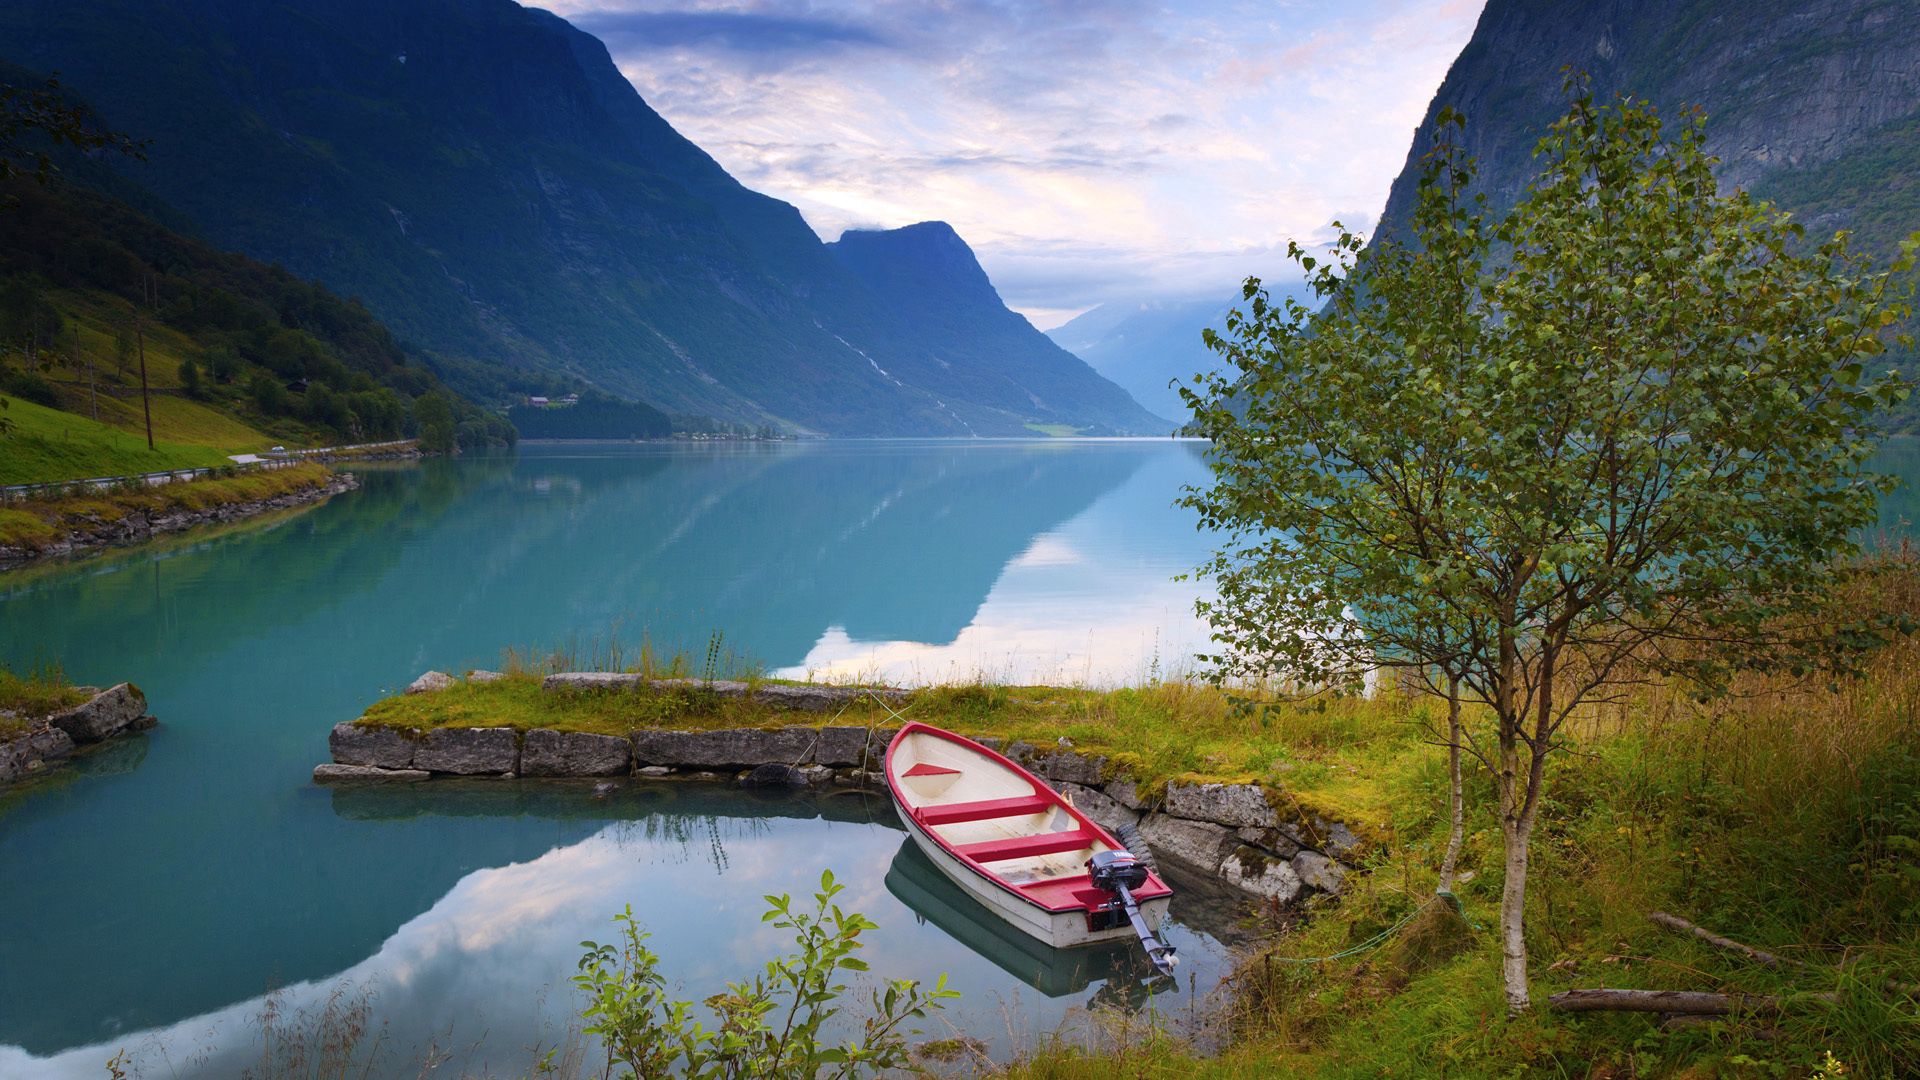 lake, blue water, norway, boat, nature, grass, stones, mountains, shore, bank